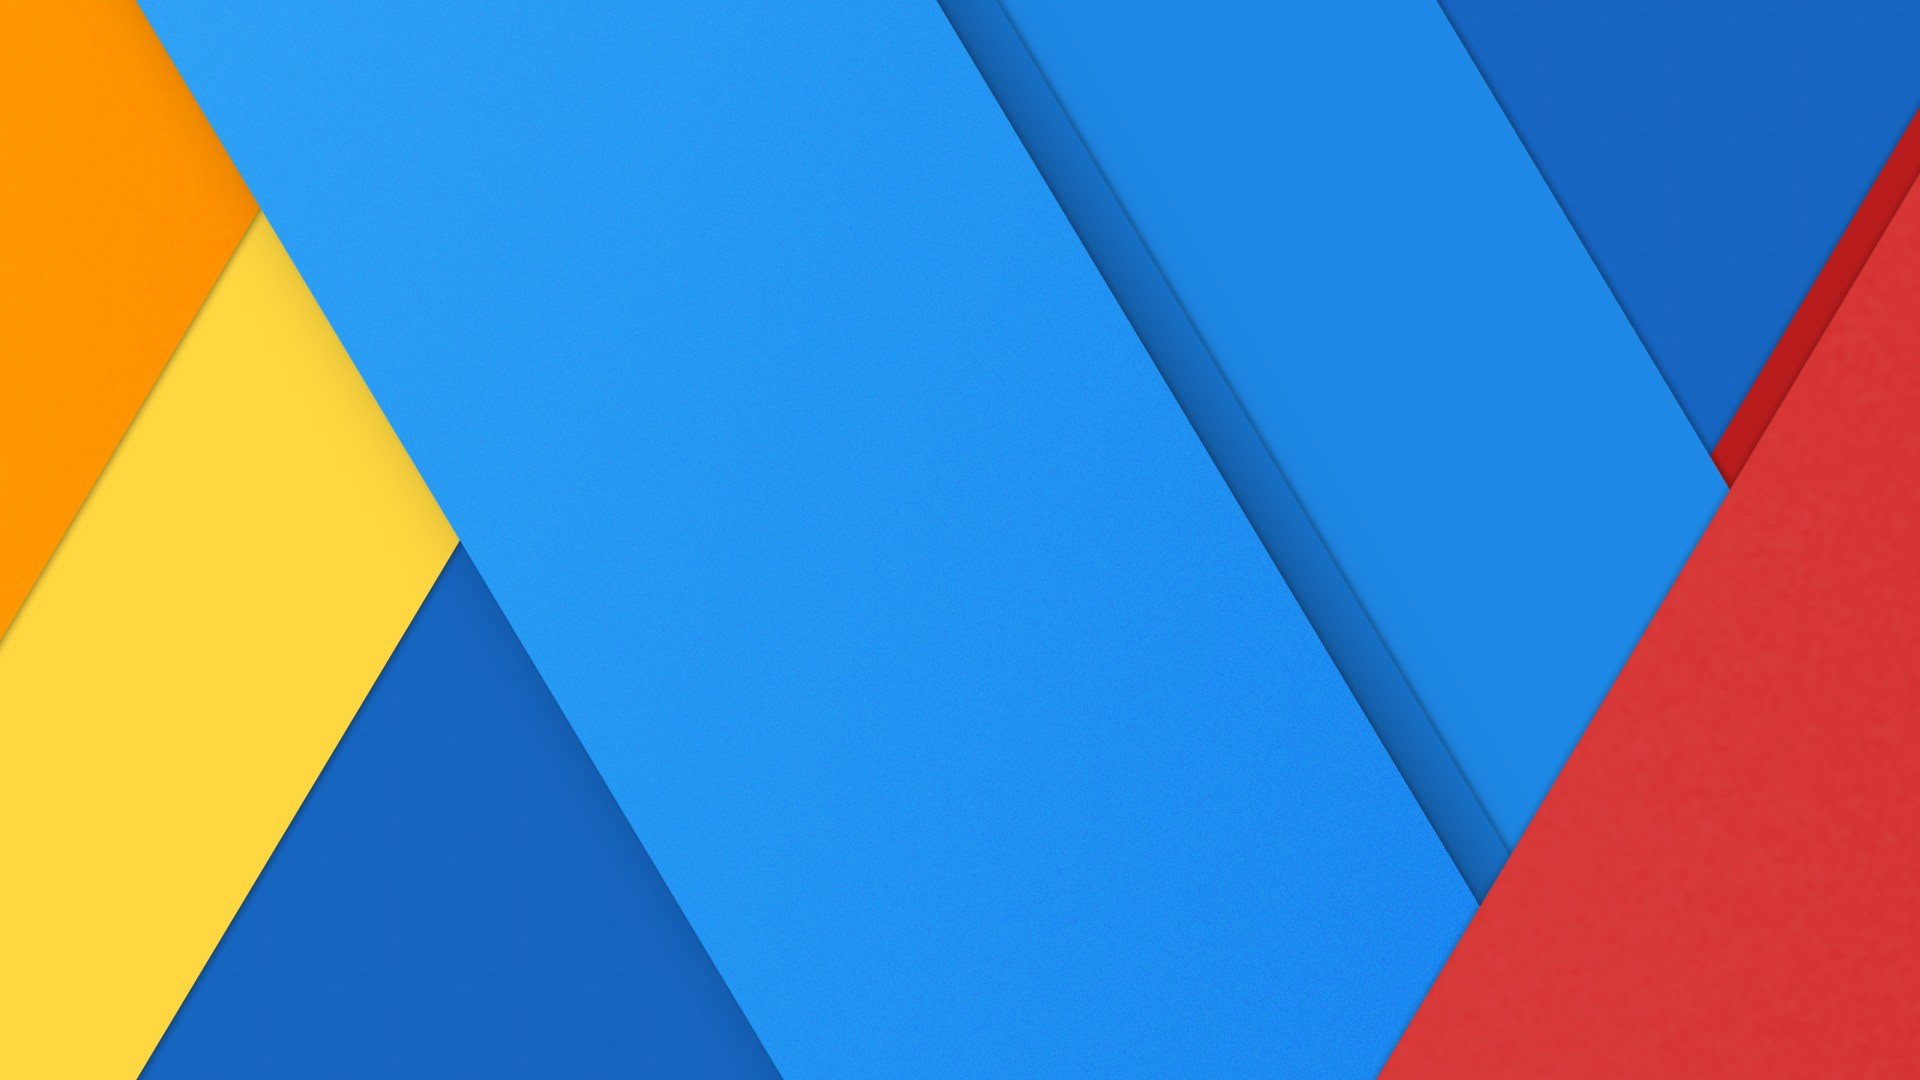 Download Cyanogenmod Android 3d & Abstract Wallpaper - Red Blue Yellow Abstract , HD Wallpaper & Backgrounds